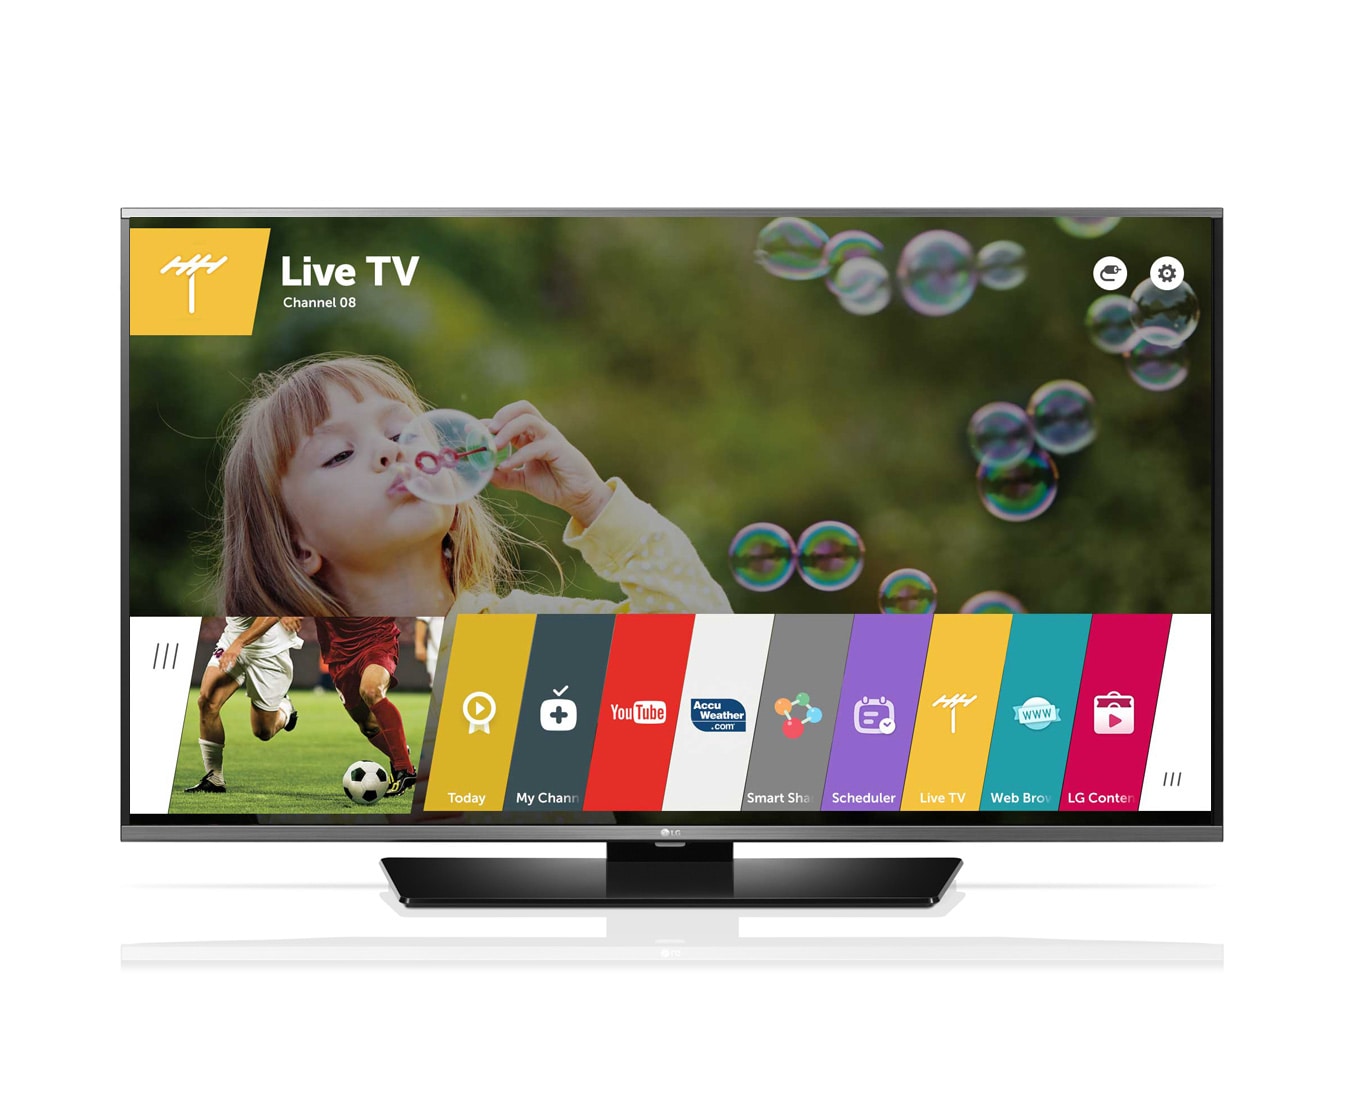 LG Smart TV with webOS 2.0, 43LF6300